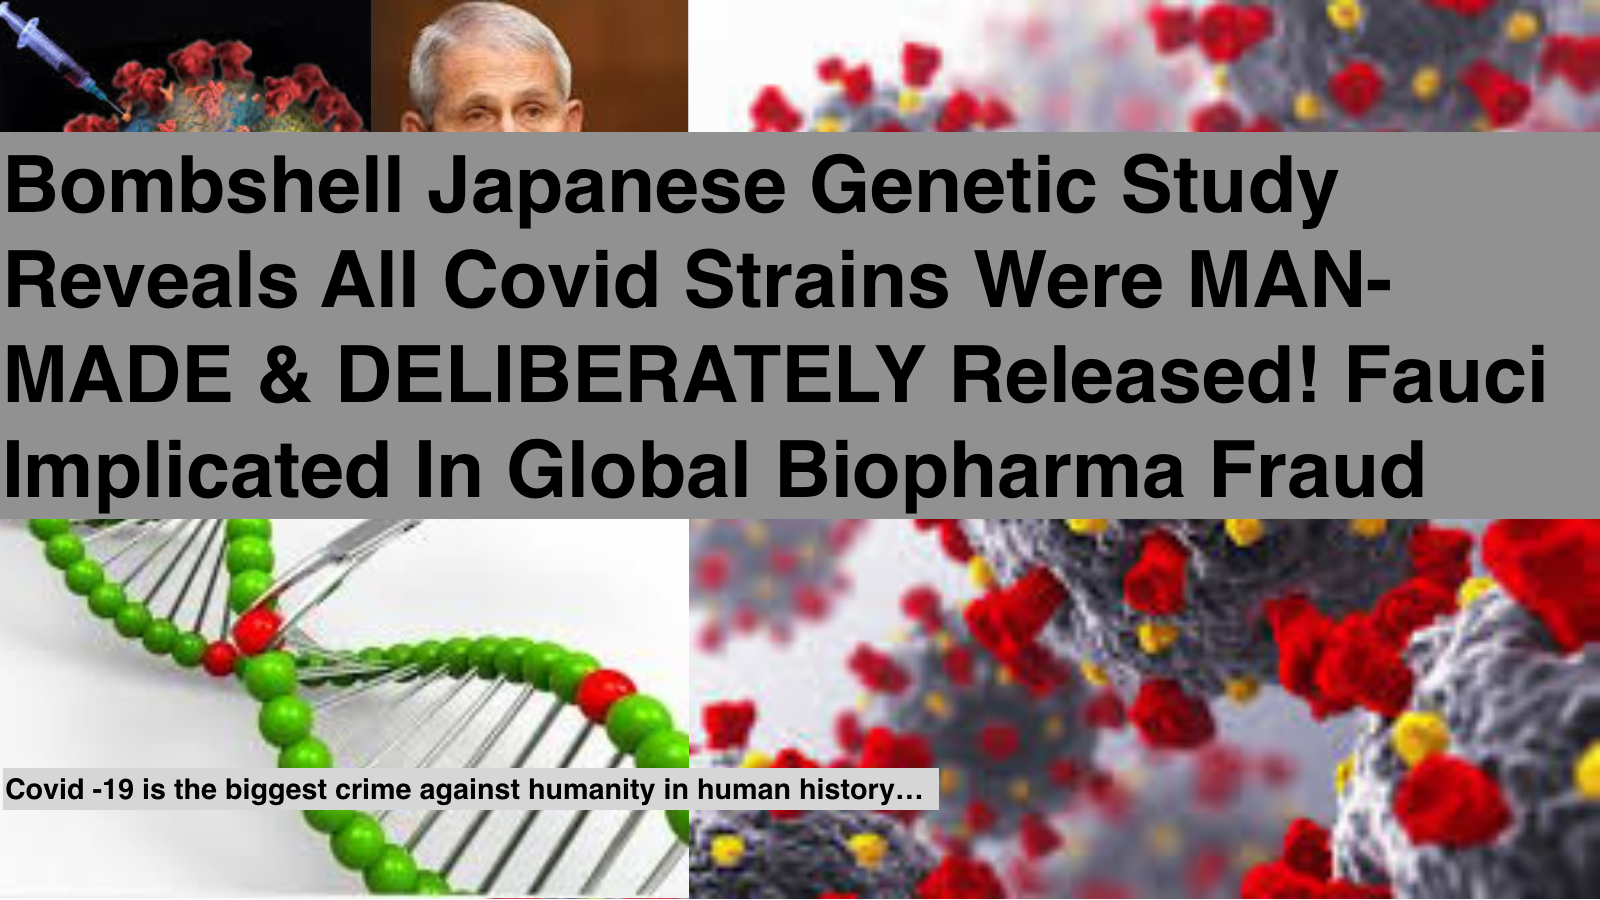 Bombshell Japanese Genetic Study Reveals ALL Covid Strains Were MAN MADE & DELIBERATELY Released! Fauci Implicated In Global Biopharma Fraud